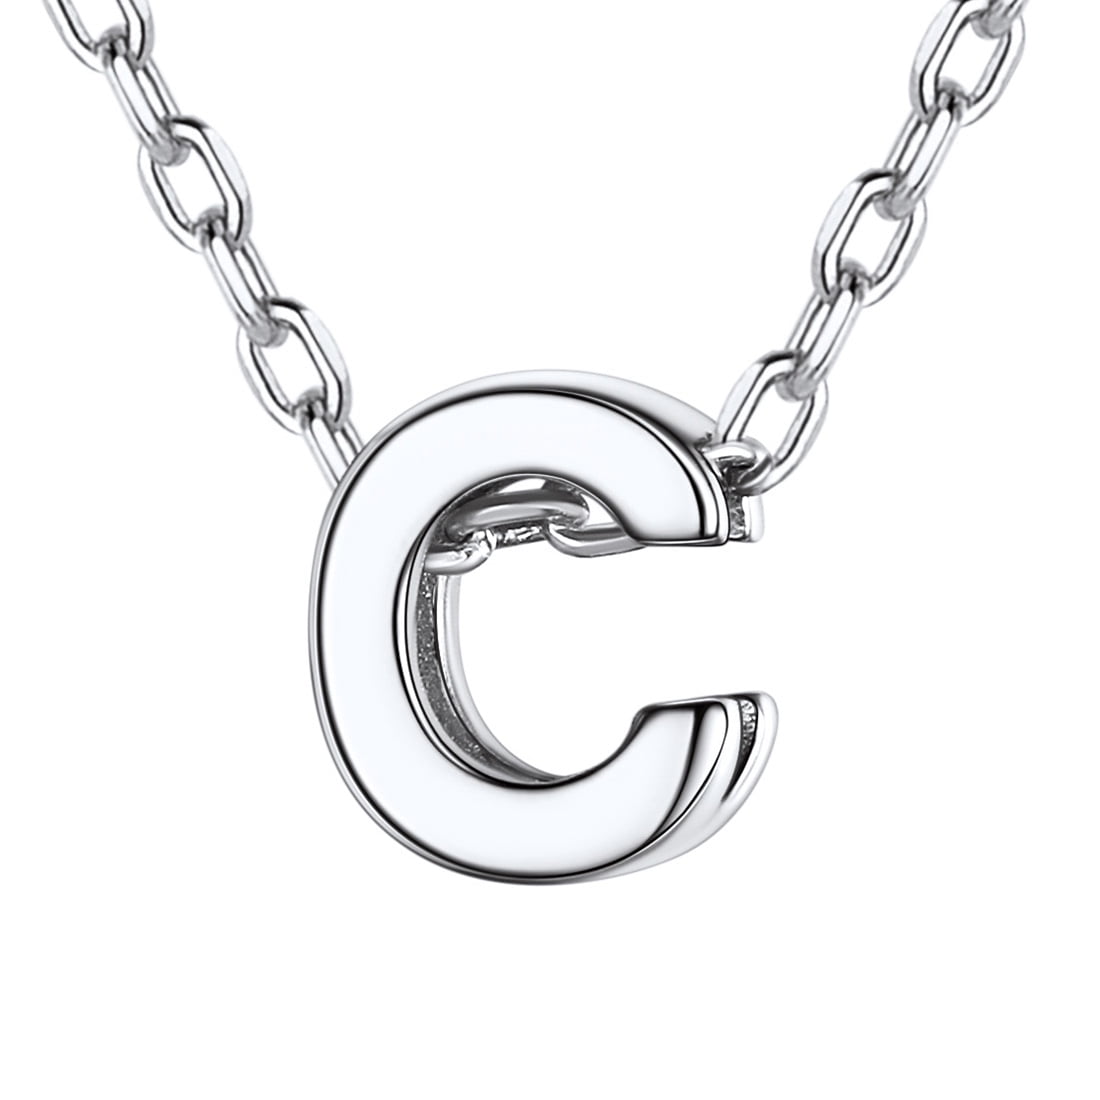 Showroom of 925 sterling silver alphabet (letter c) pendant mga - pds0170 |  Jewelxy - 127591